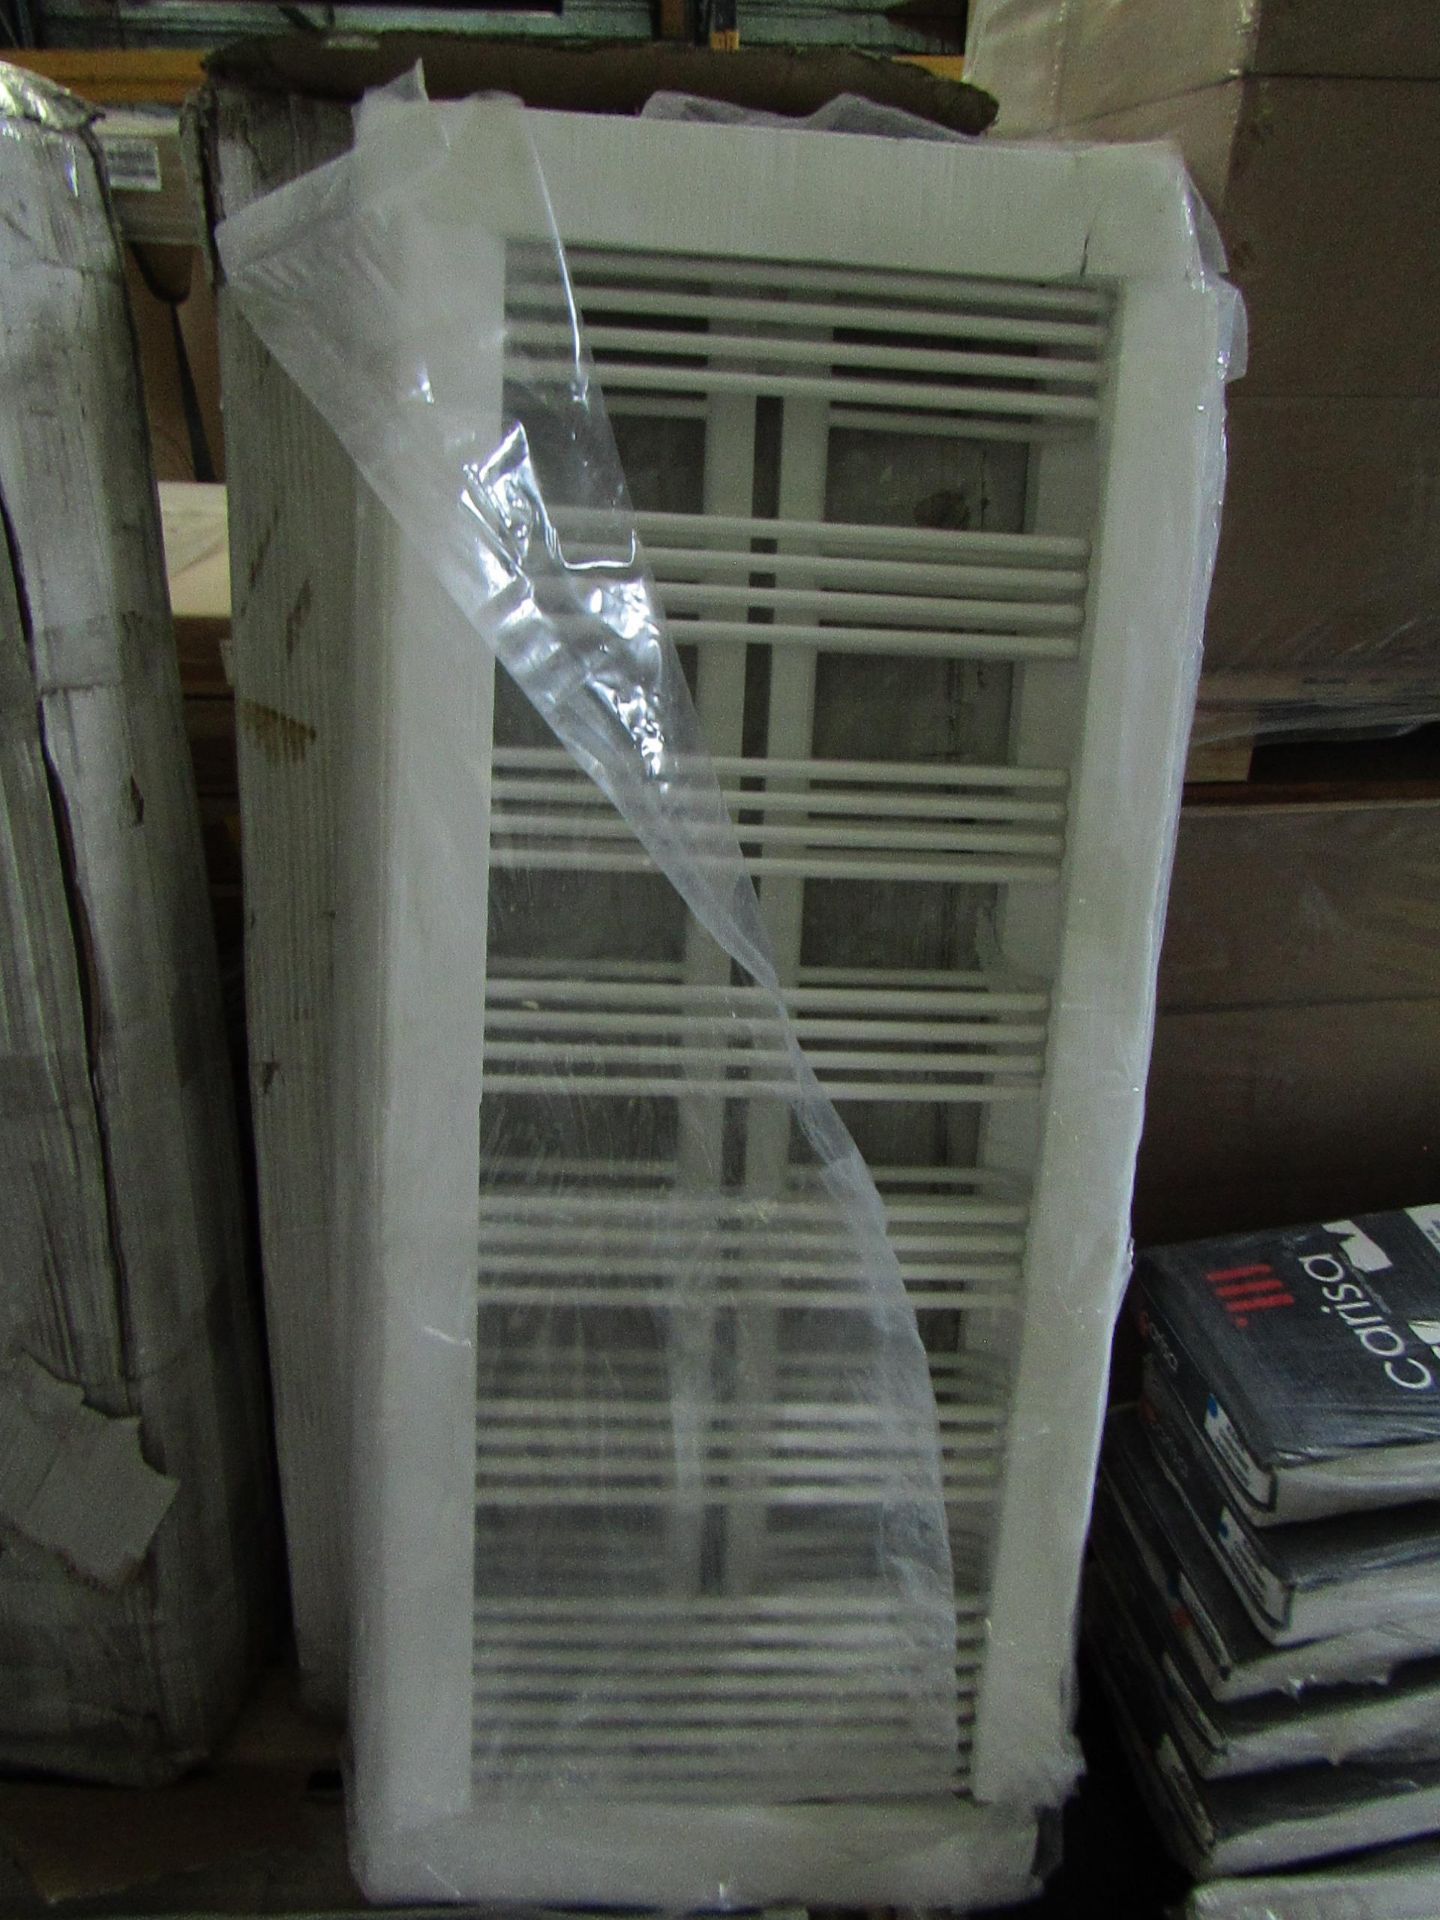 Quinn White towel radiator 560x1410, has wall Brackets, Looks new and wrapped although this is not